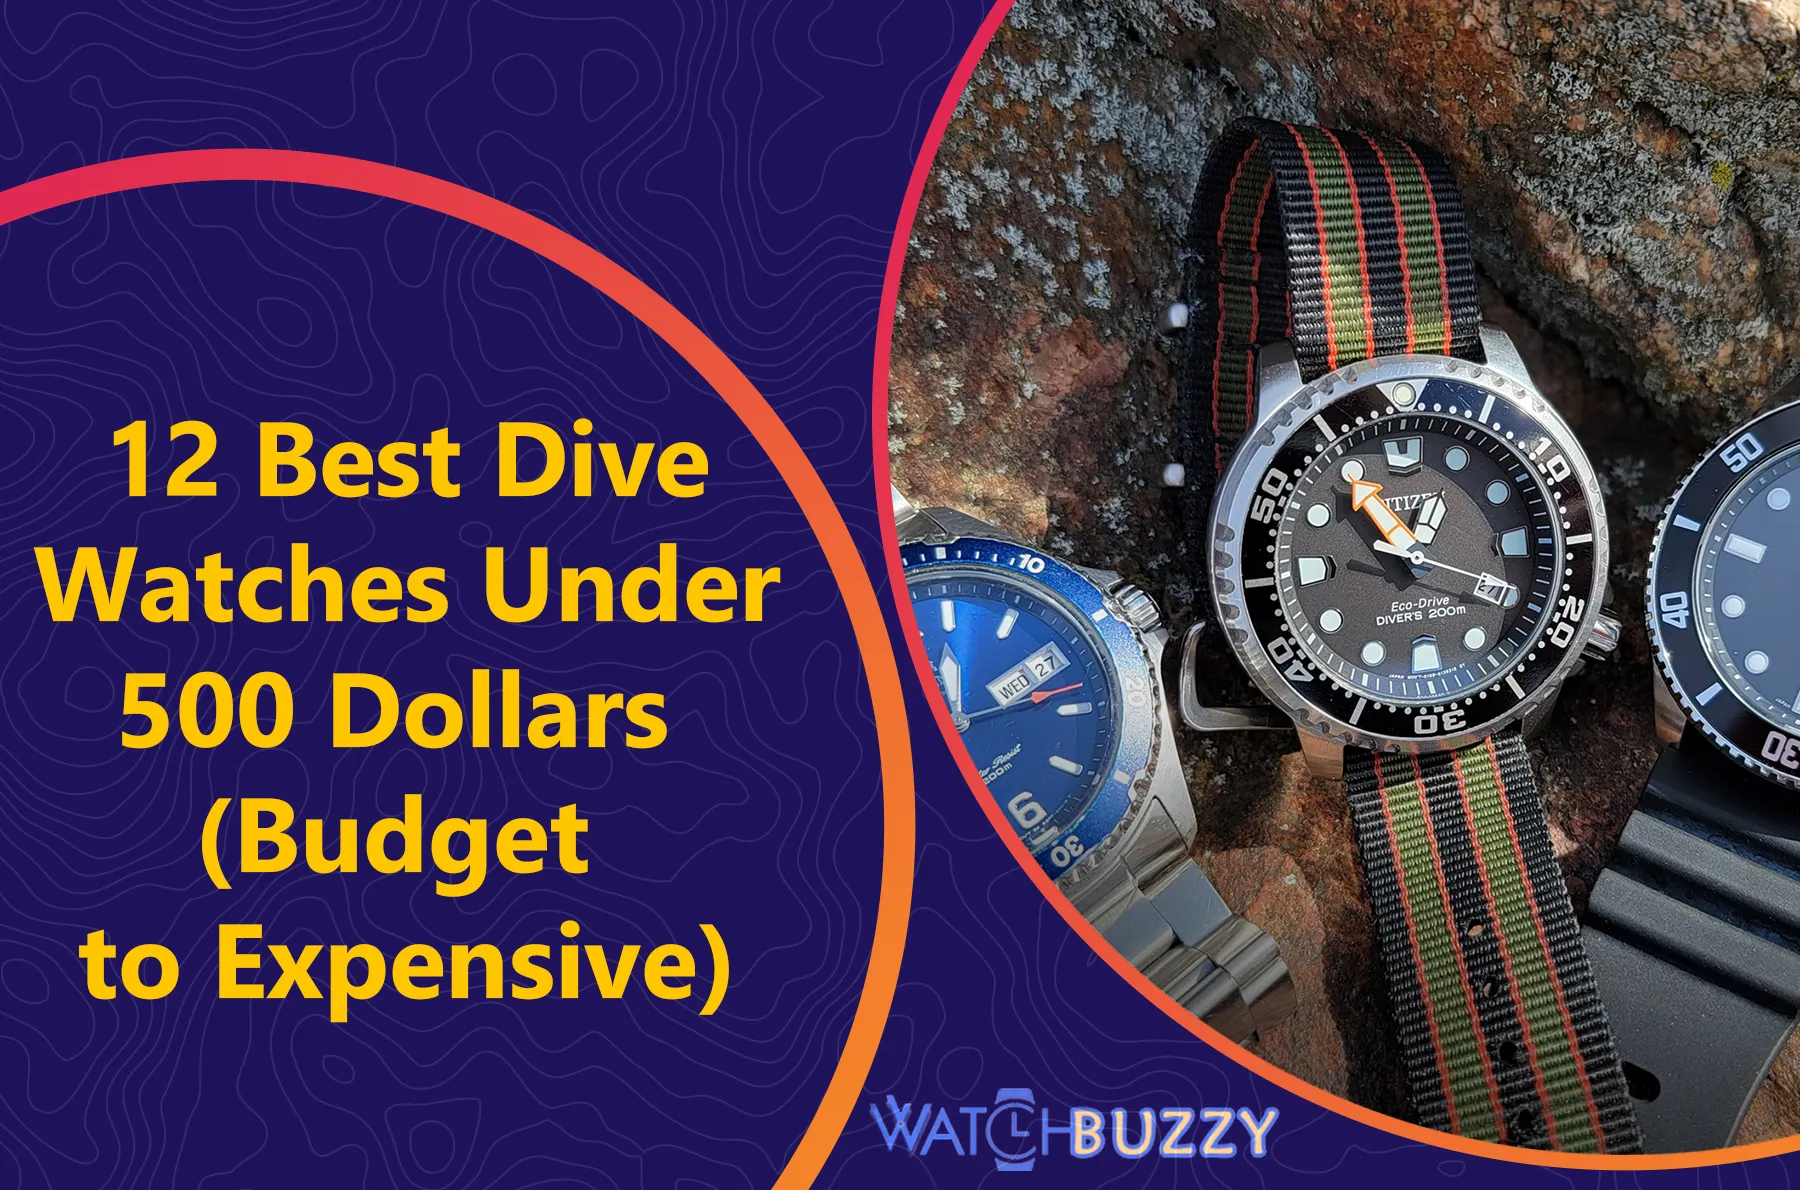 12 Best Dive Watches Under 500 Dollars (Budget to Expensive)